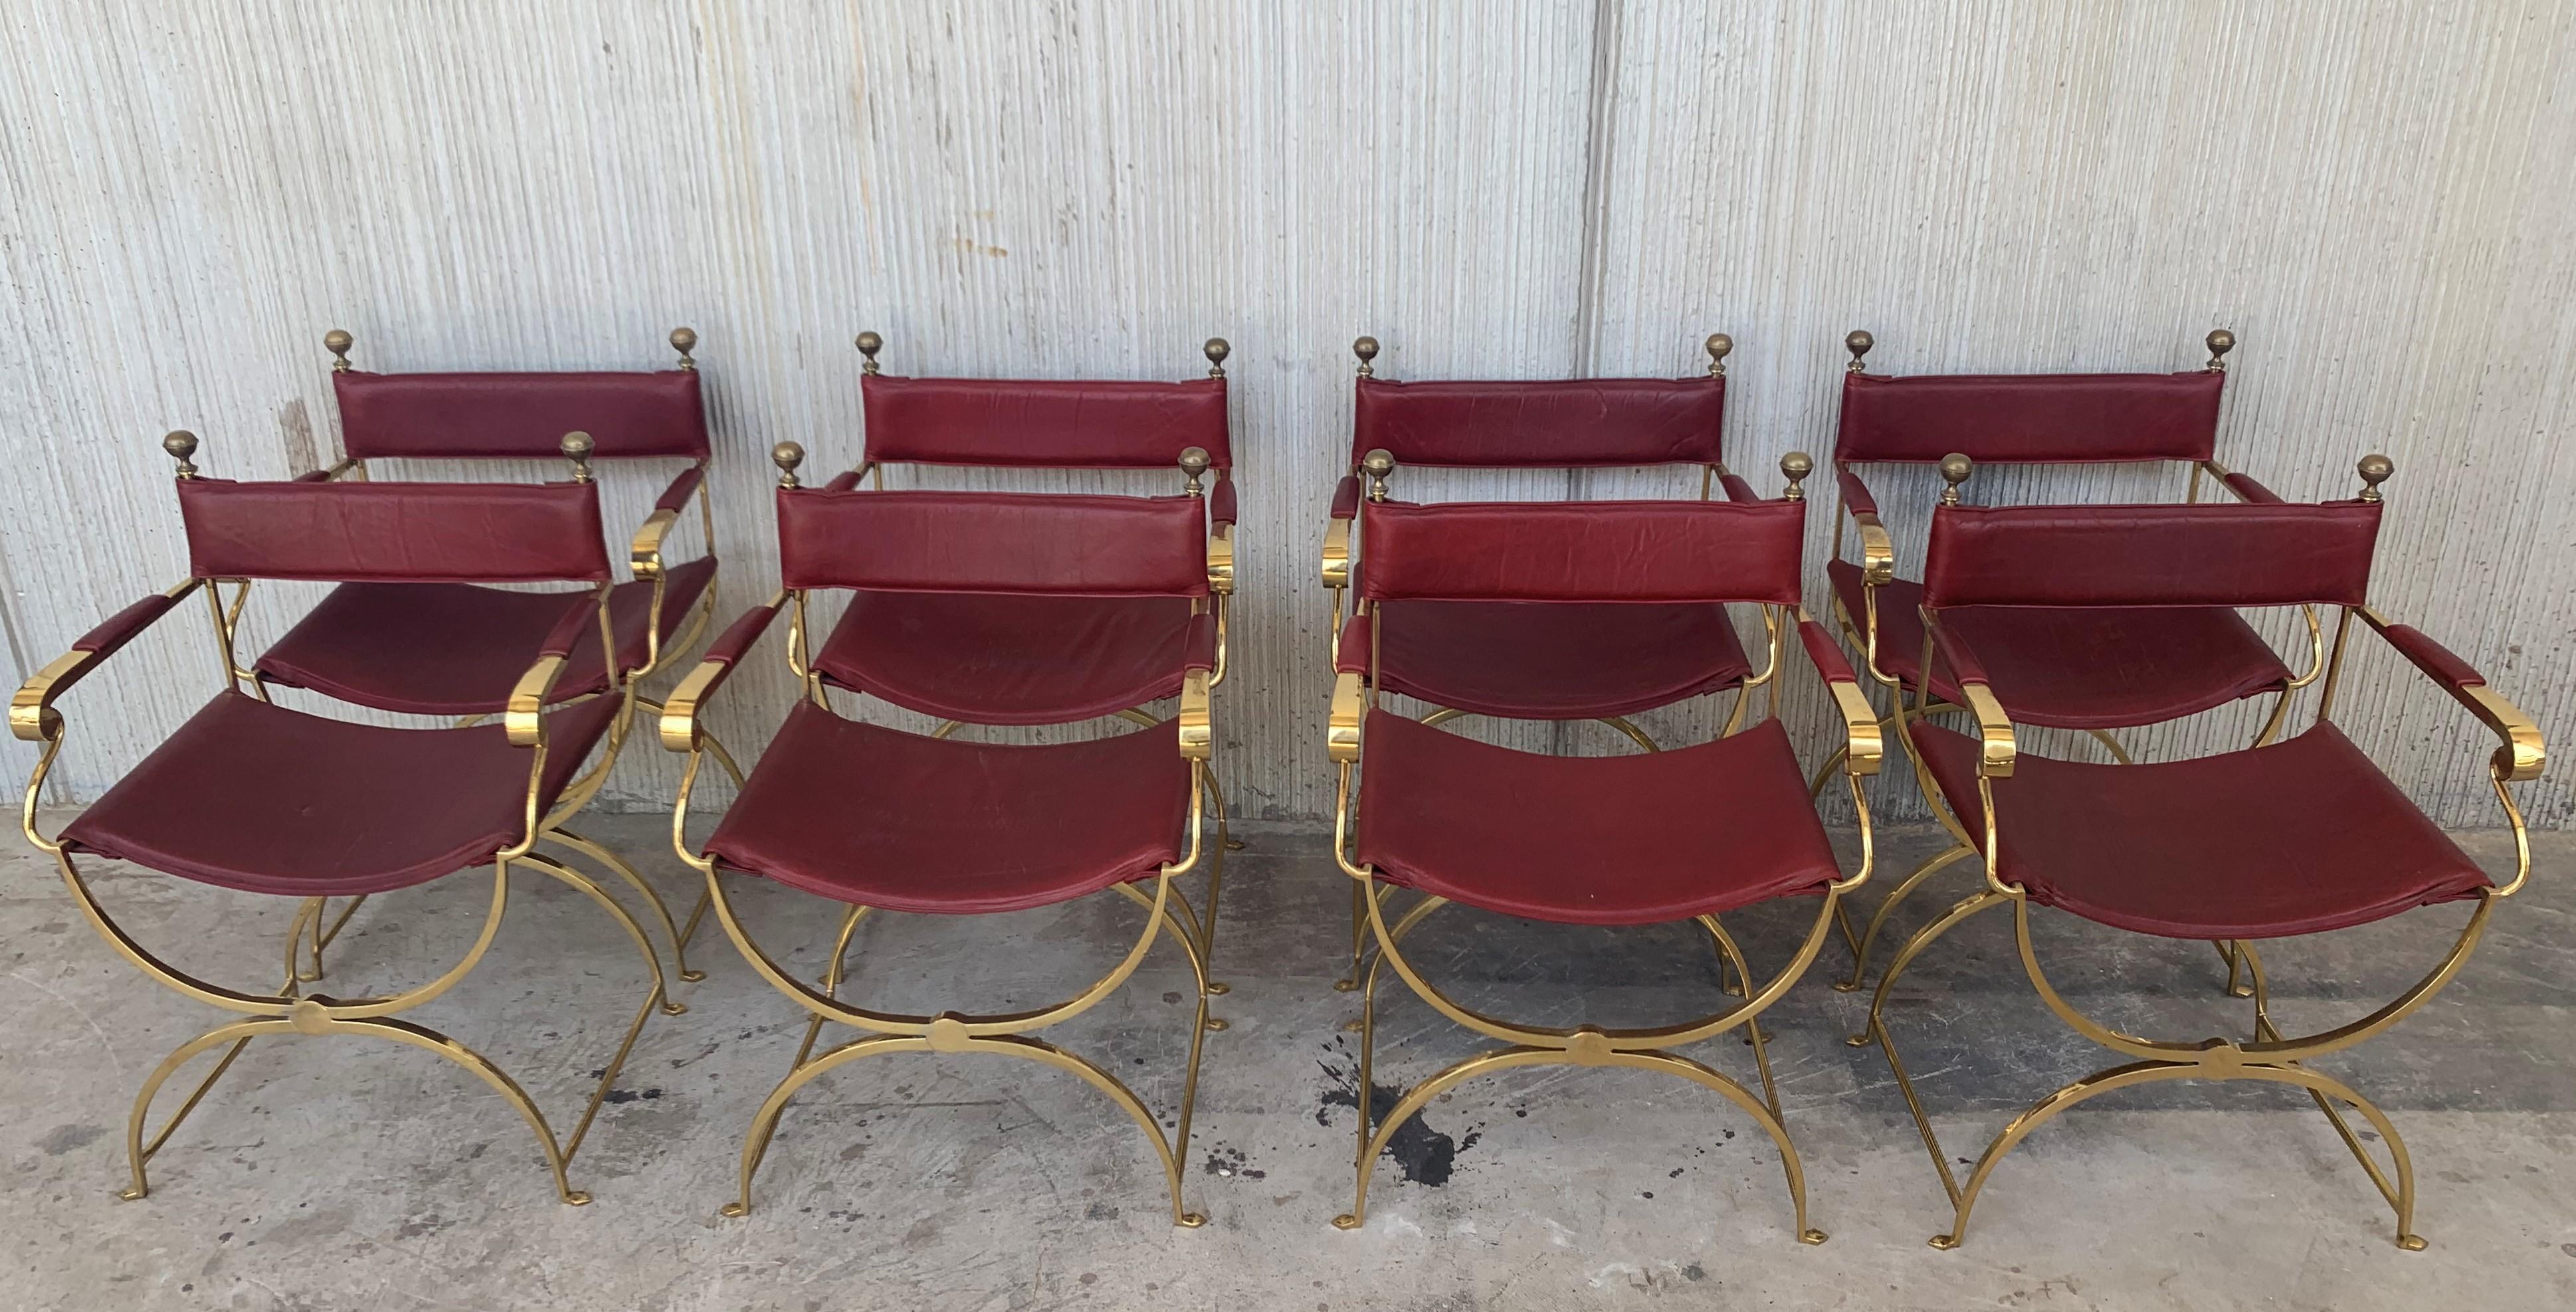 1960s Italian Hollywood Regency Chrome and Leather Savonarola Director's Chairs For Sale 1